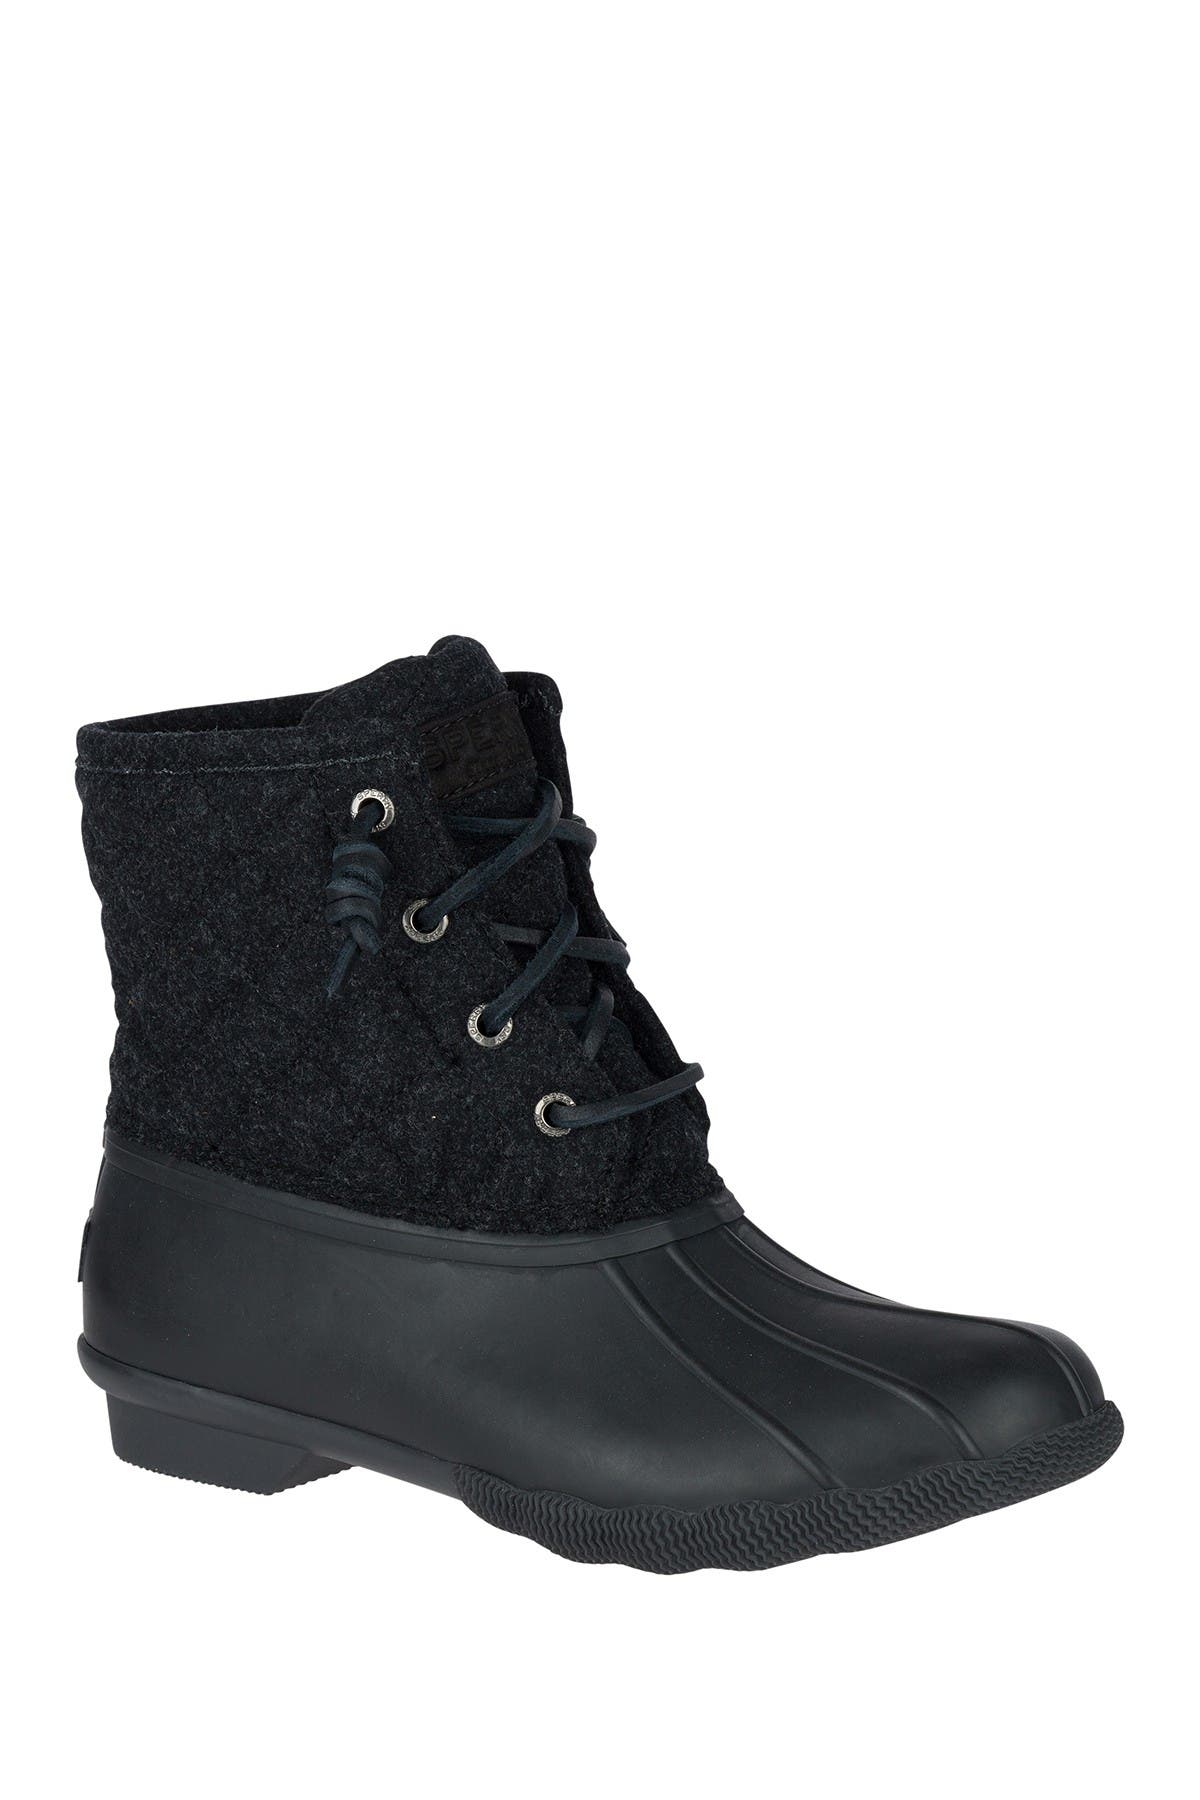 Sperry SALTWATER QUILTED WOOL DUCK BOOT